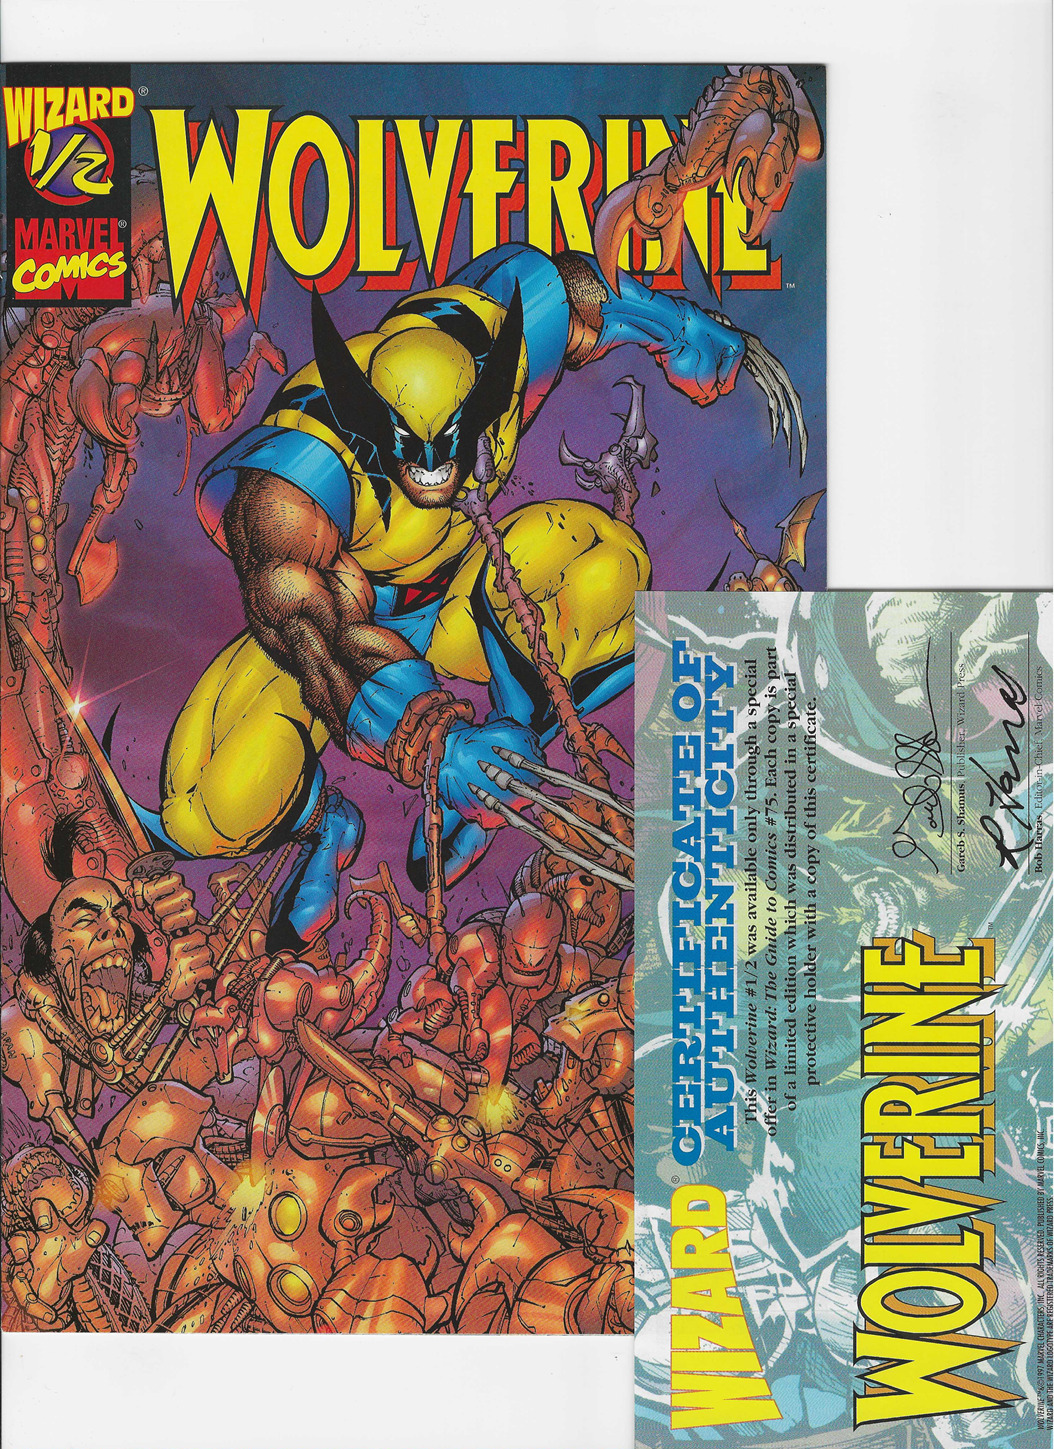 Marvel Comics Wolverine #1/2 (1997) Wizard Exclusive Limited Edition with COA